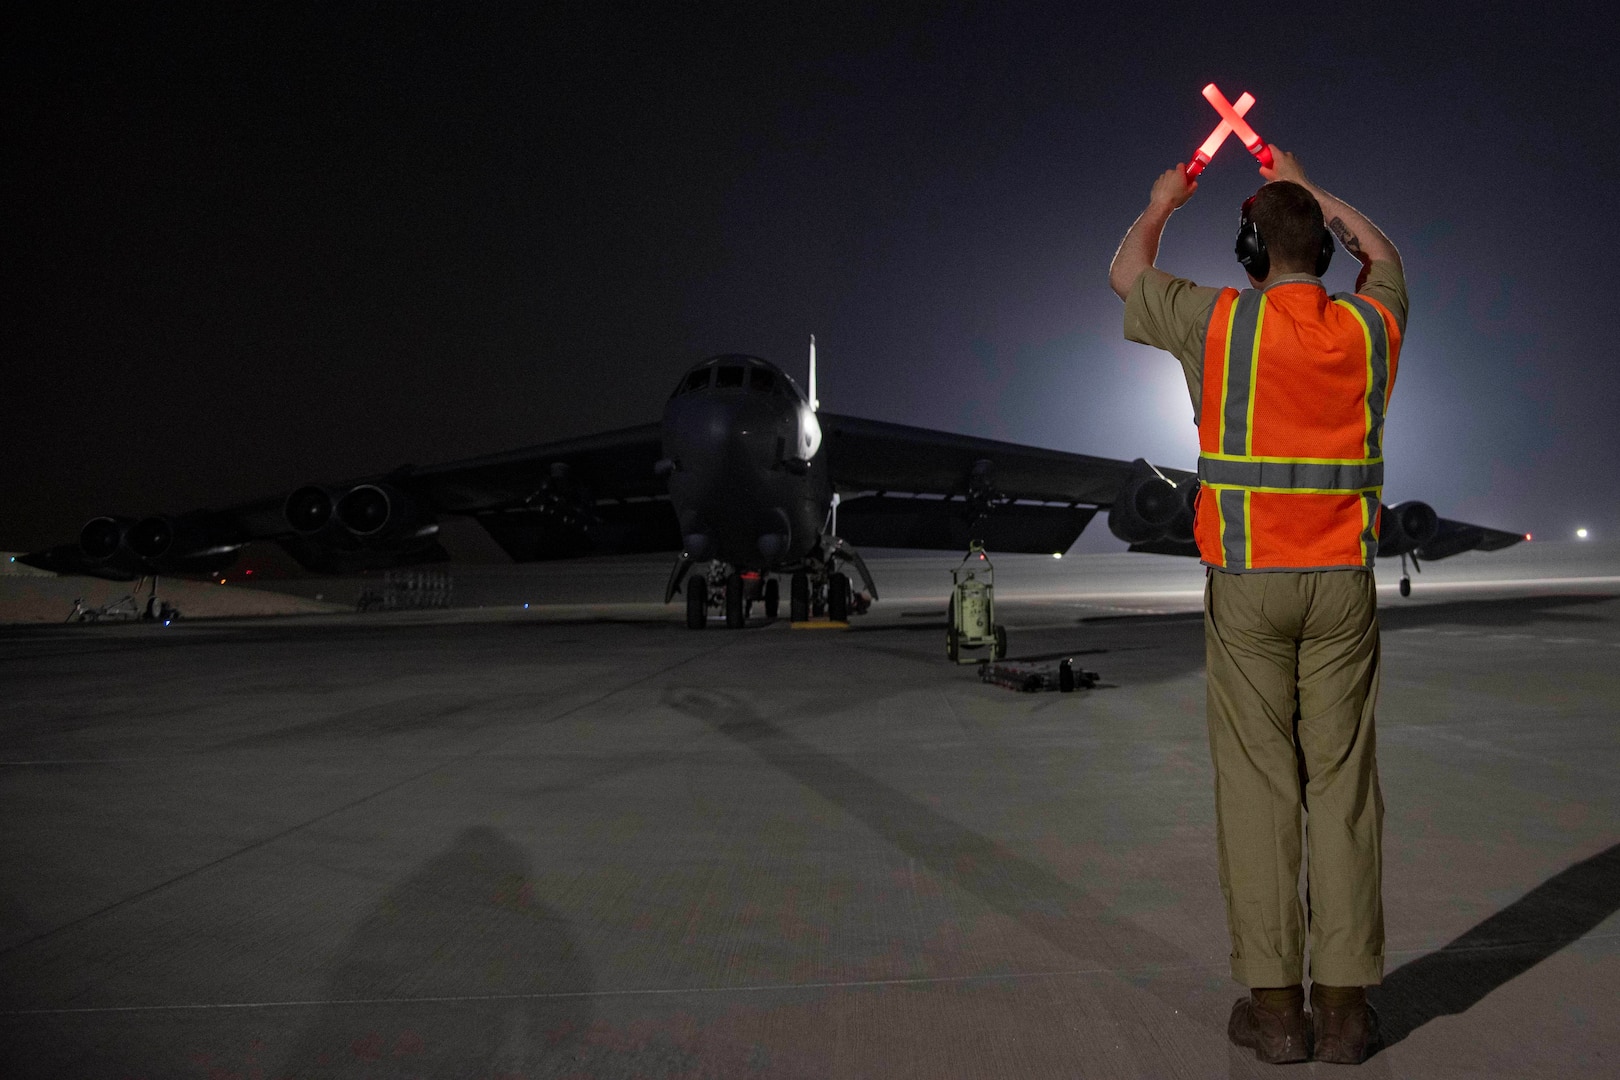 A military aircraft taxis on an airfield.  A man uses a light to direct the aircraft.